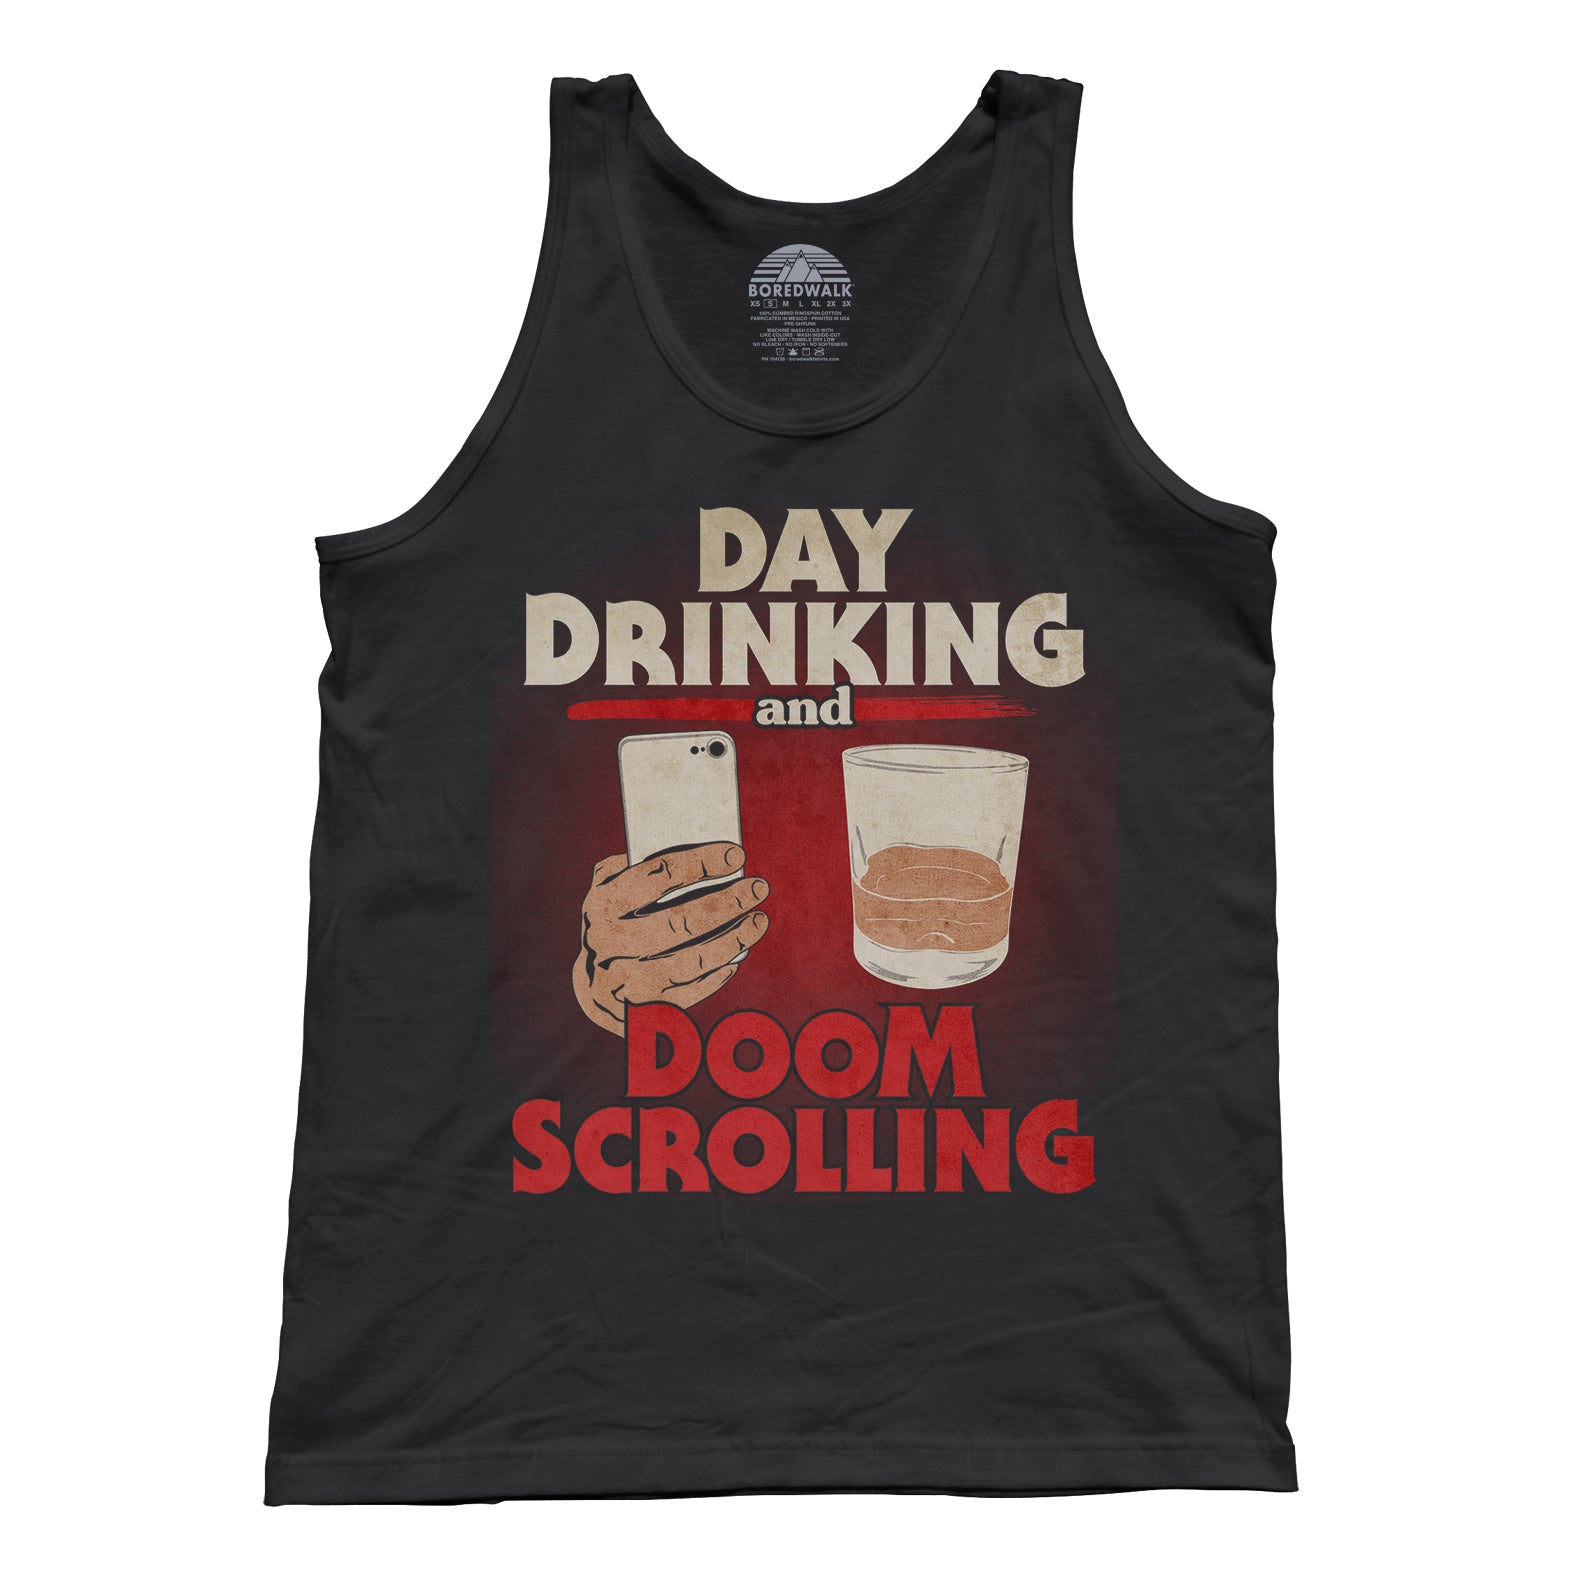 Unisex Day Drinking and Doom Scrolling Tank Top